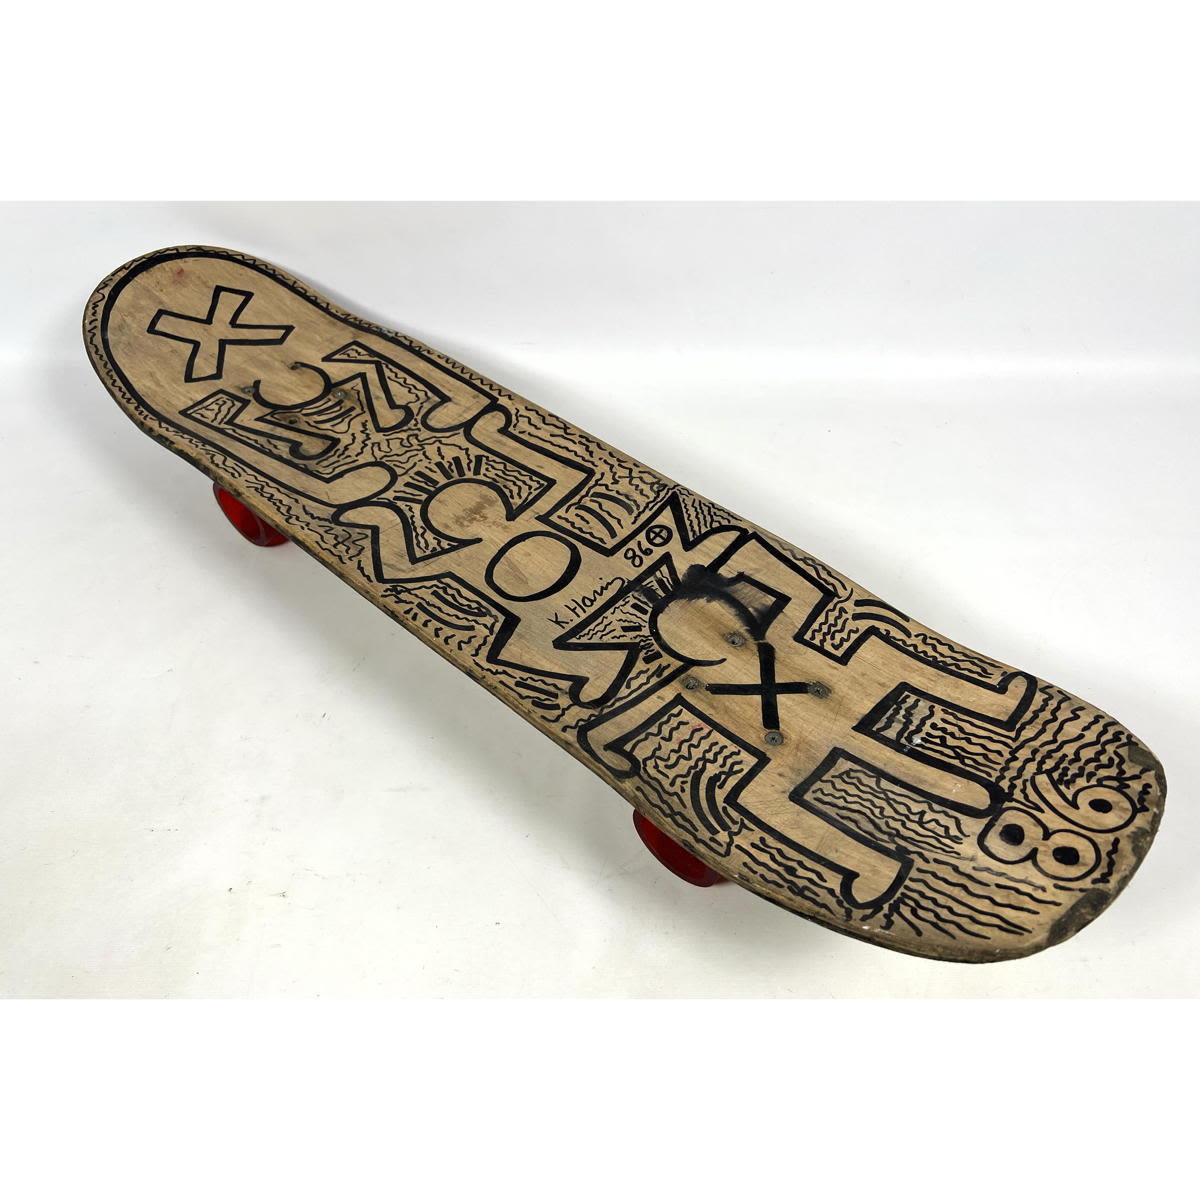 Vintage Skateboard painted in the